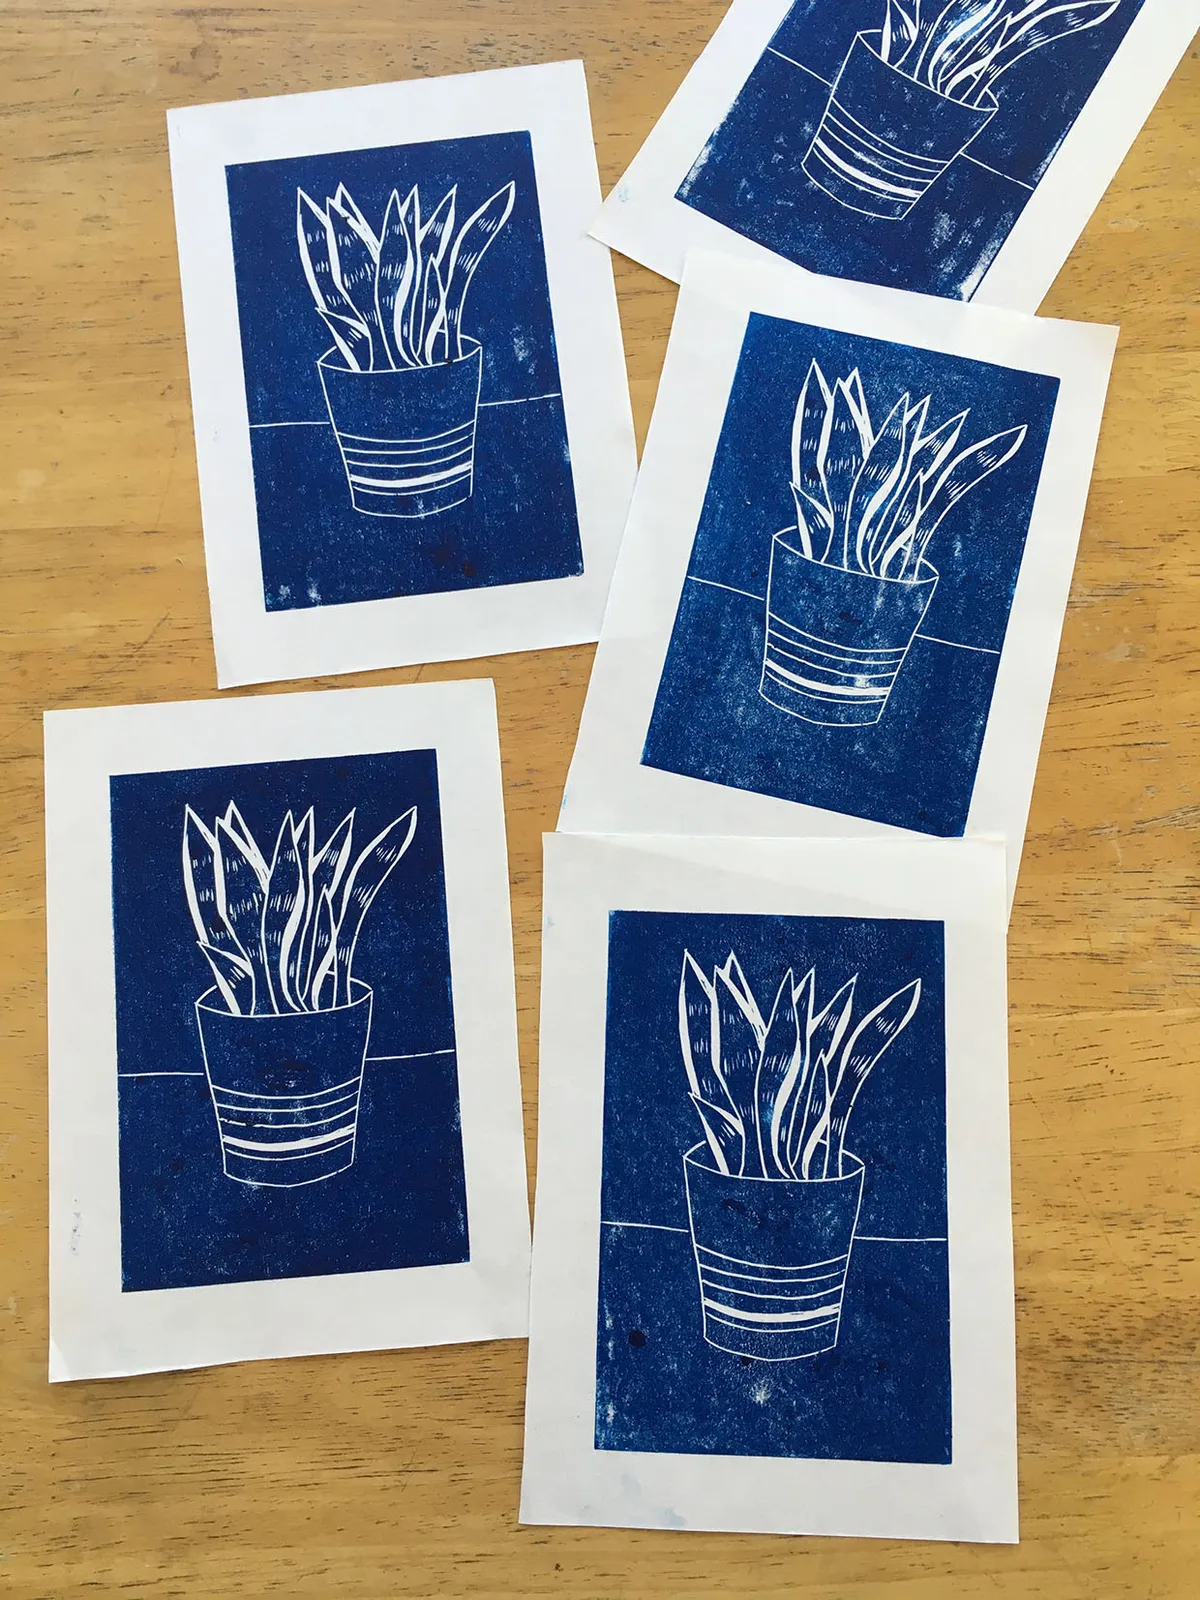 What tools and equipment do you need to make a linocut print?